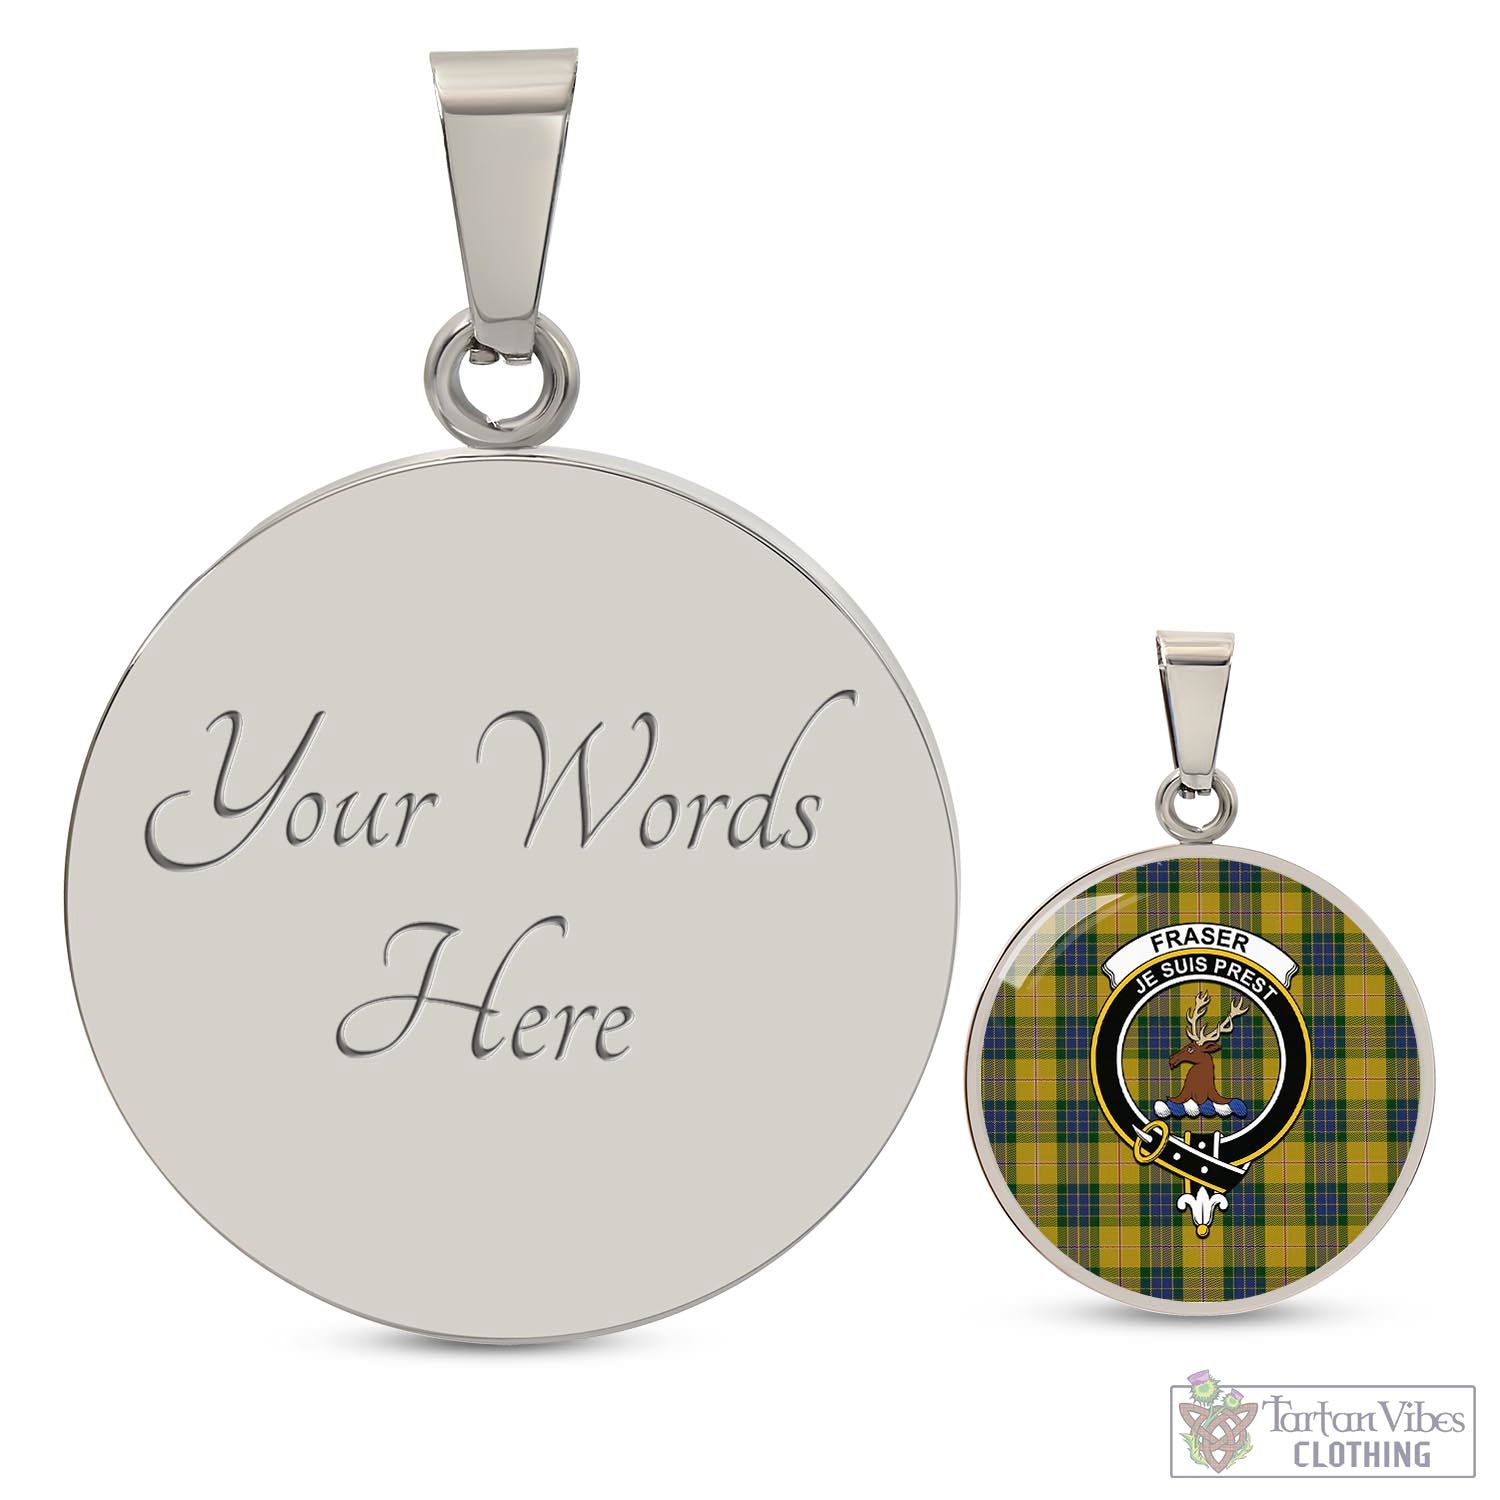 Tartan Vibes Clothing Fraser Yellow Tartan Circle Necklace with Family Crest